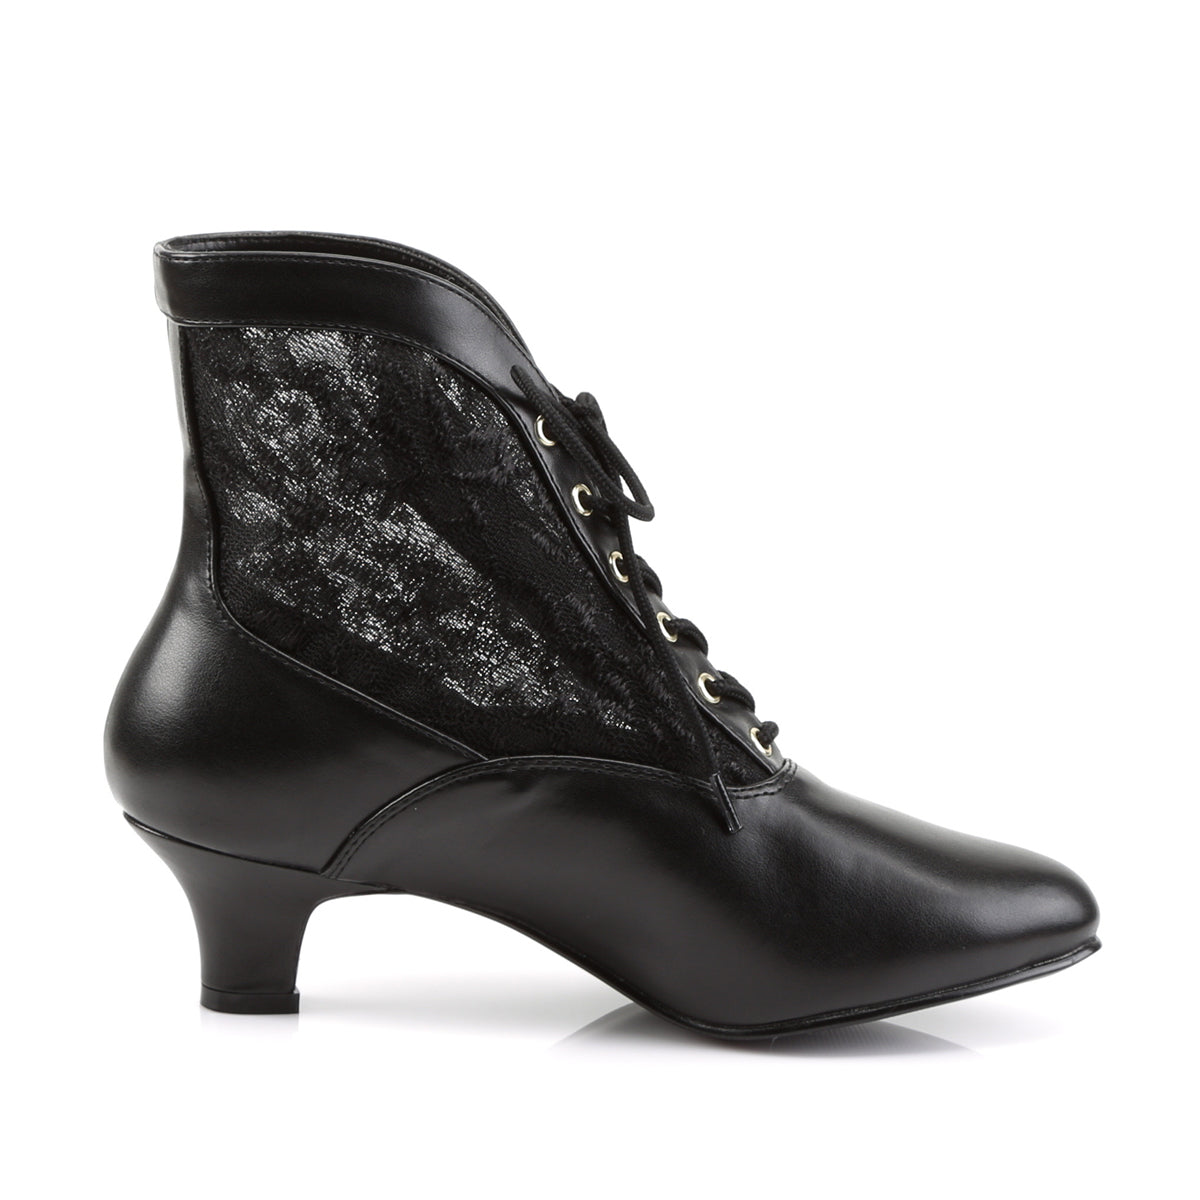 DAME-05 Black Ankle Boots